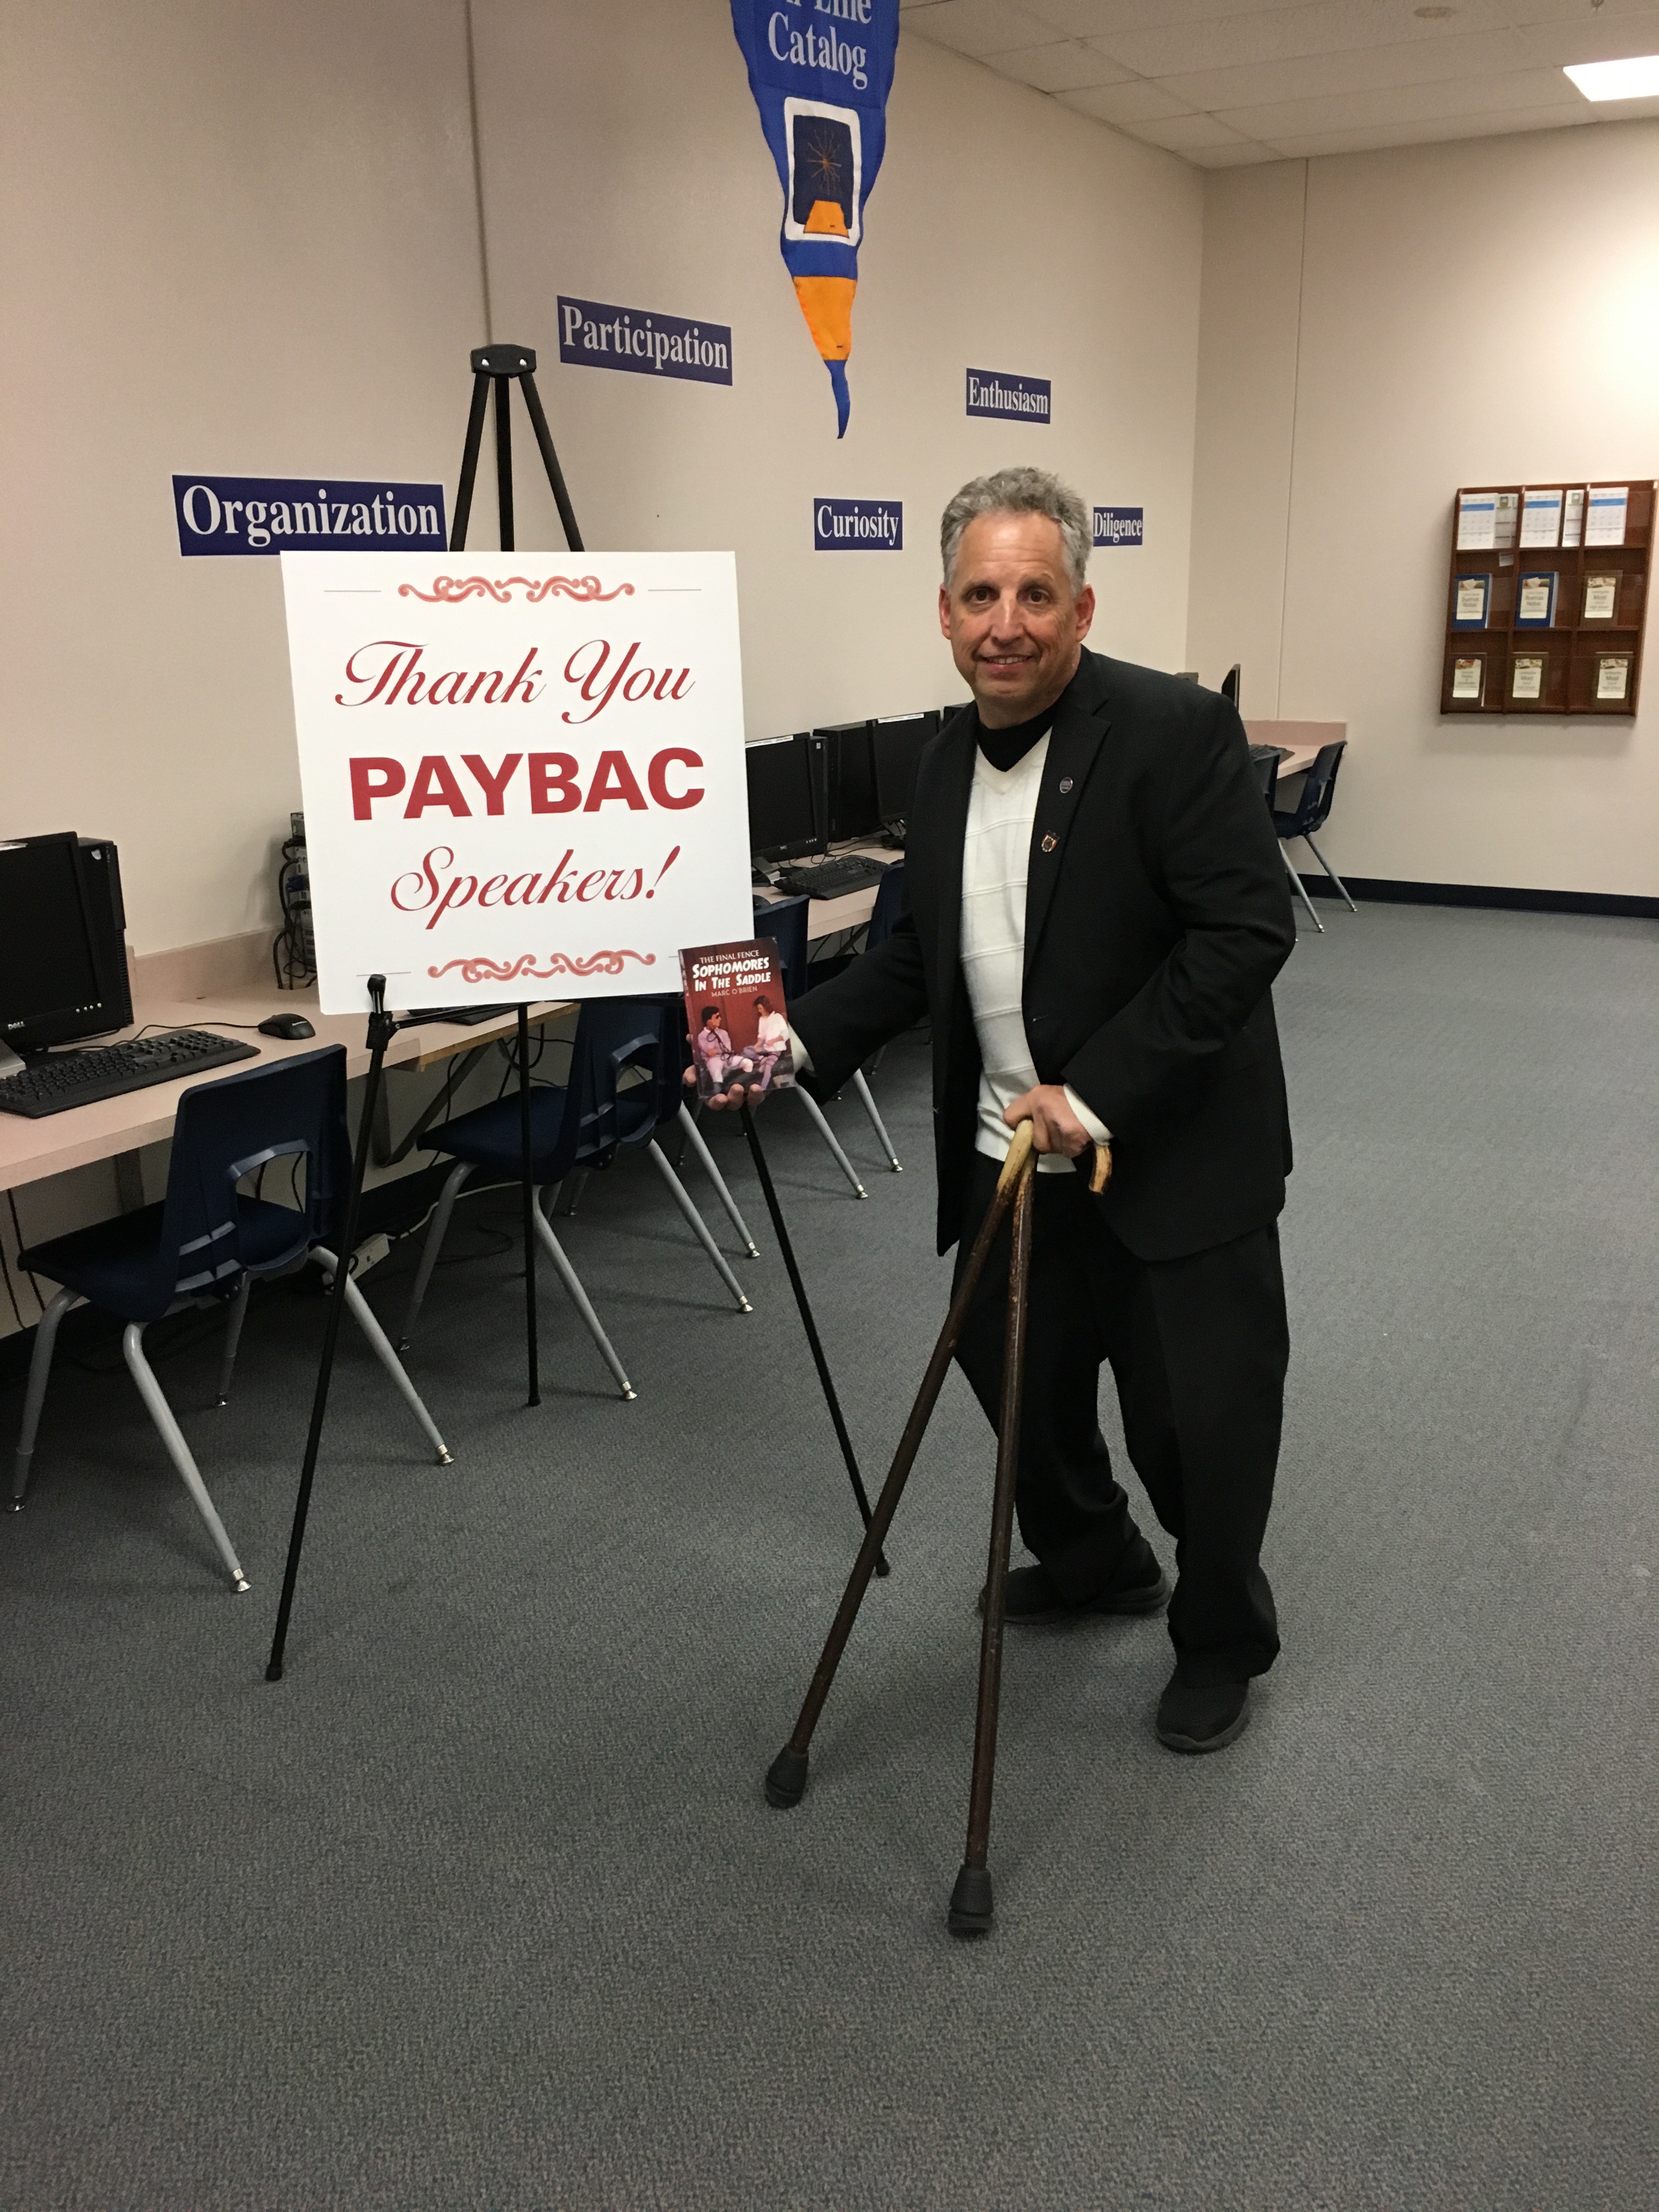 The author, Marc O'Brien attended the Paybac Program at Duane D Keller Middle School